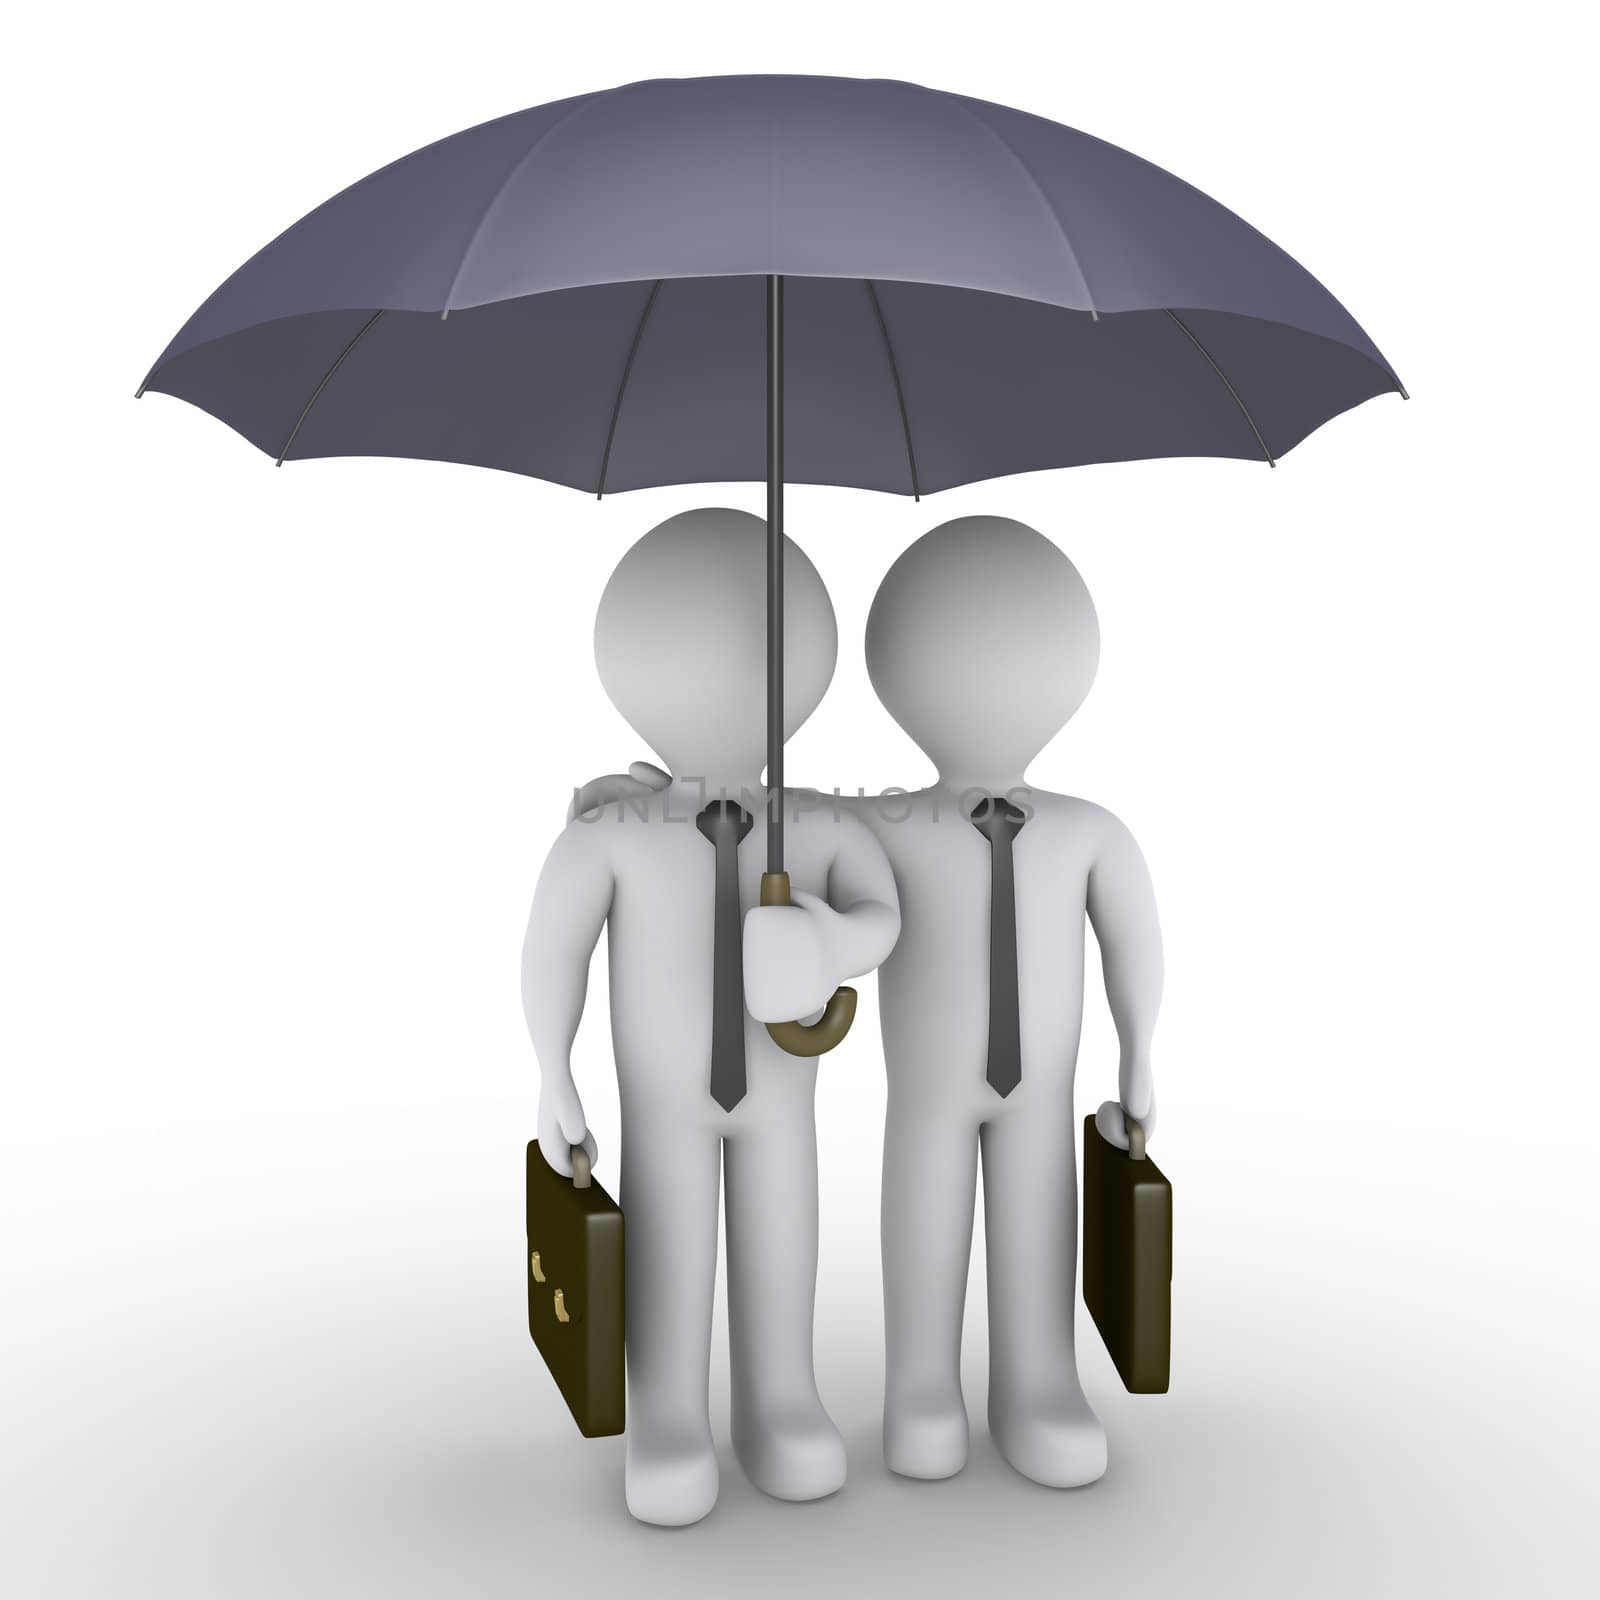 Two 3d businessmen holding suitcases are under an umbrella